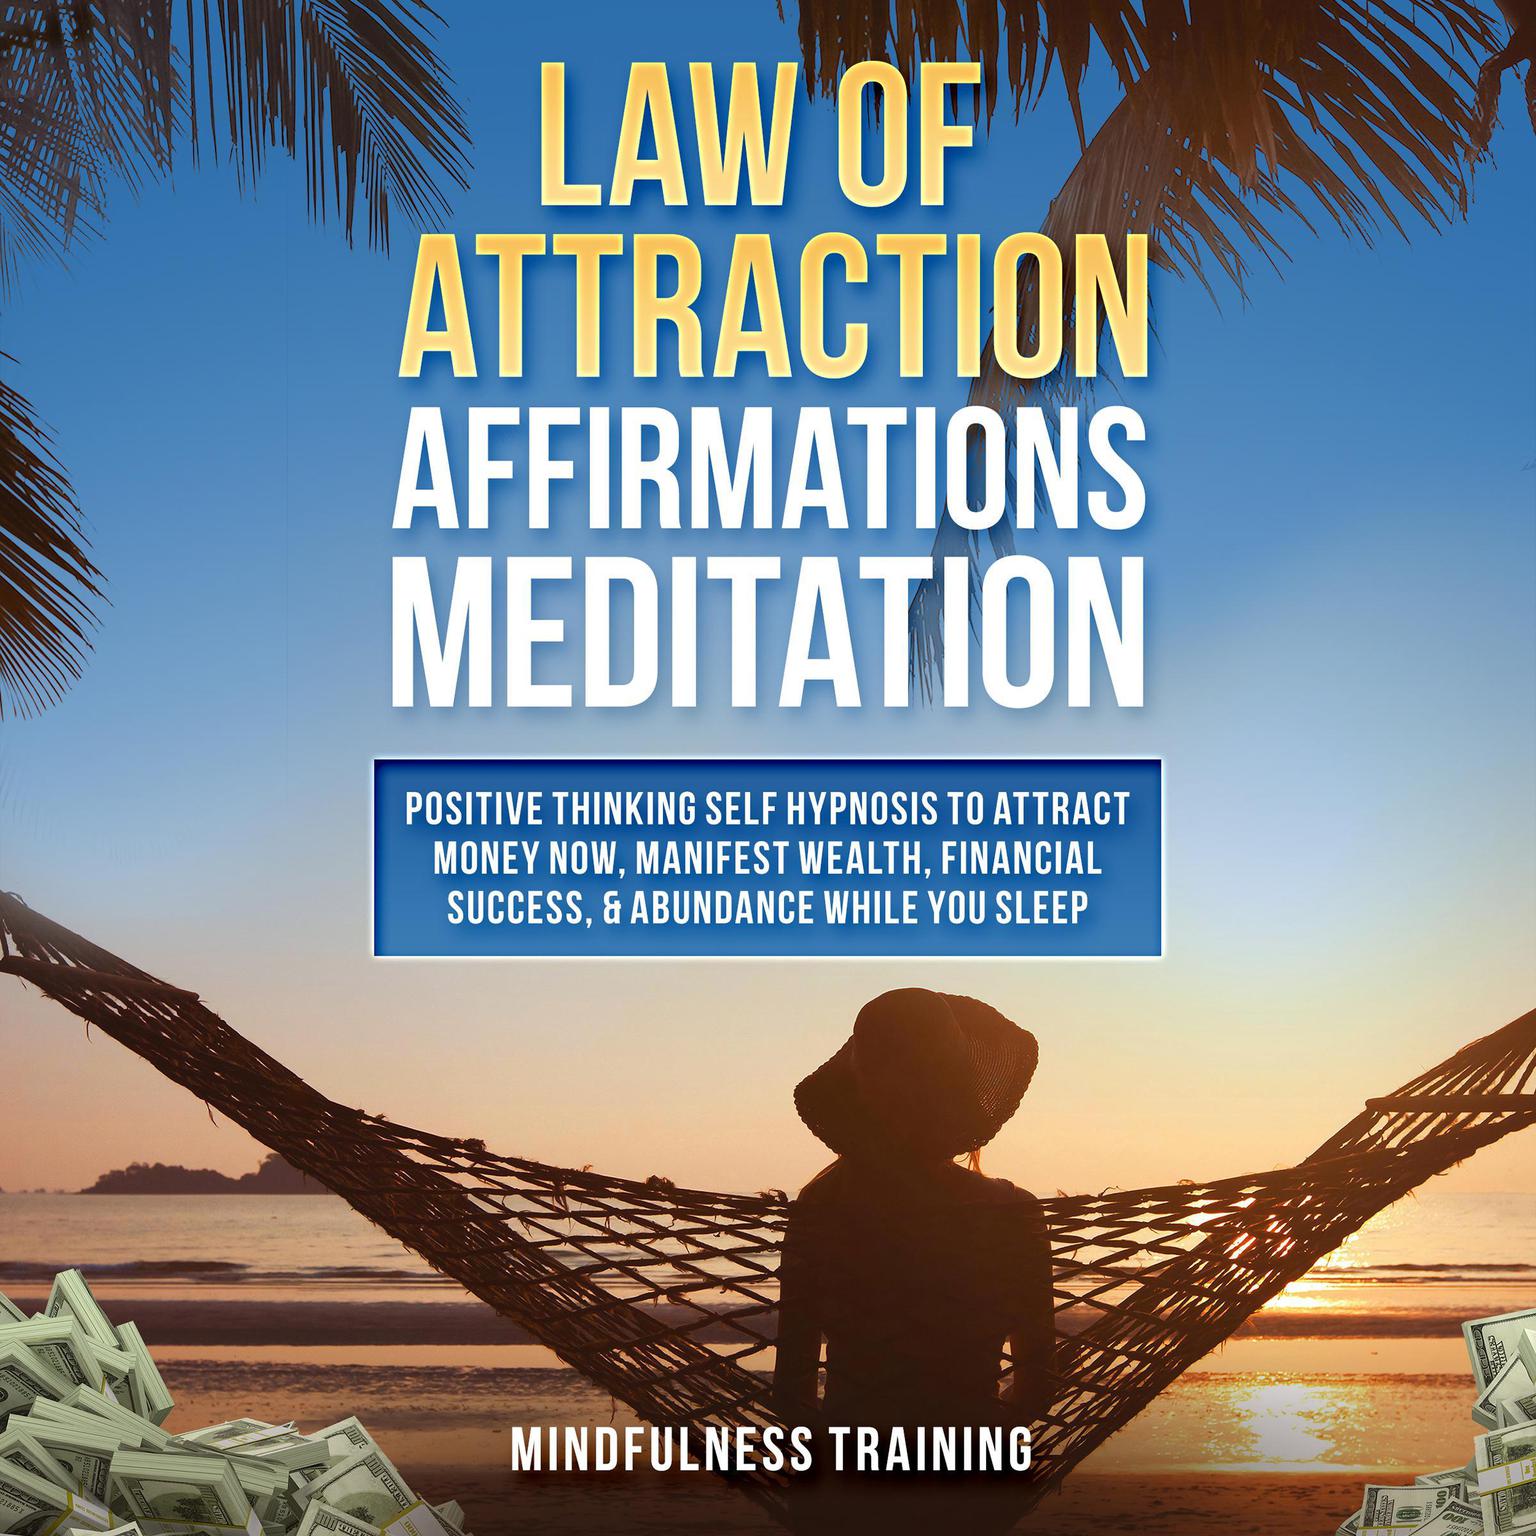 Law of Attraction Affirmations Meditation: : Positive Thinking Self Hypnosis to Attract Money Now, Manifest Wealth, Financial Success, & Abundance While You Sleep (Self Hypnosis, Affirmations, Guided Imagery & Relaxation Techniques) Audiobook, by Mindfulness Training